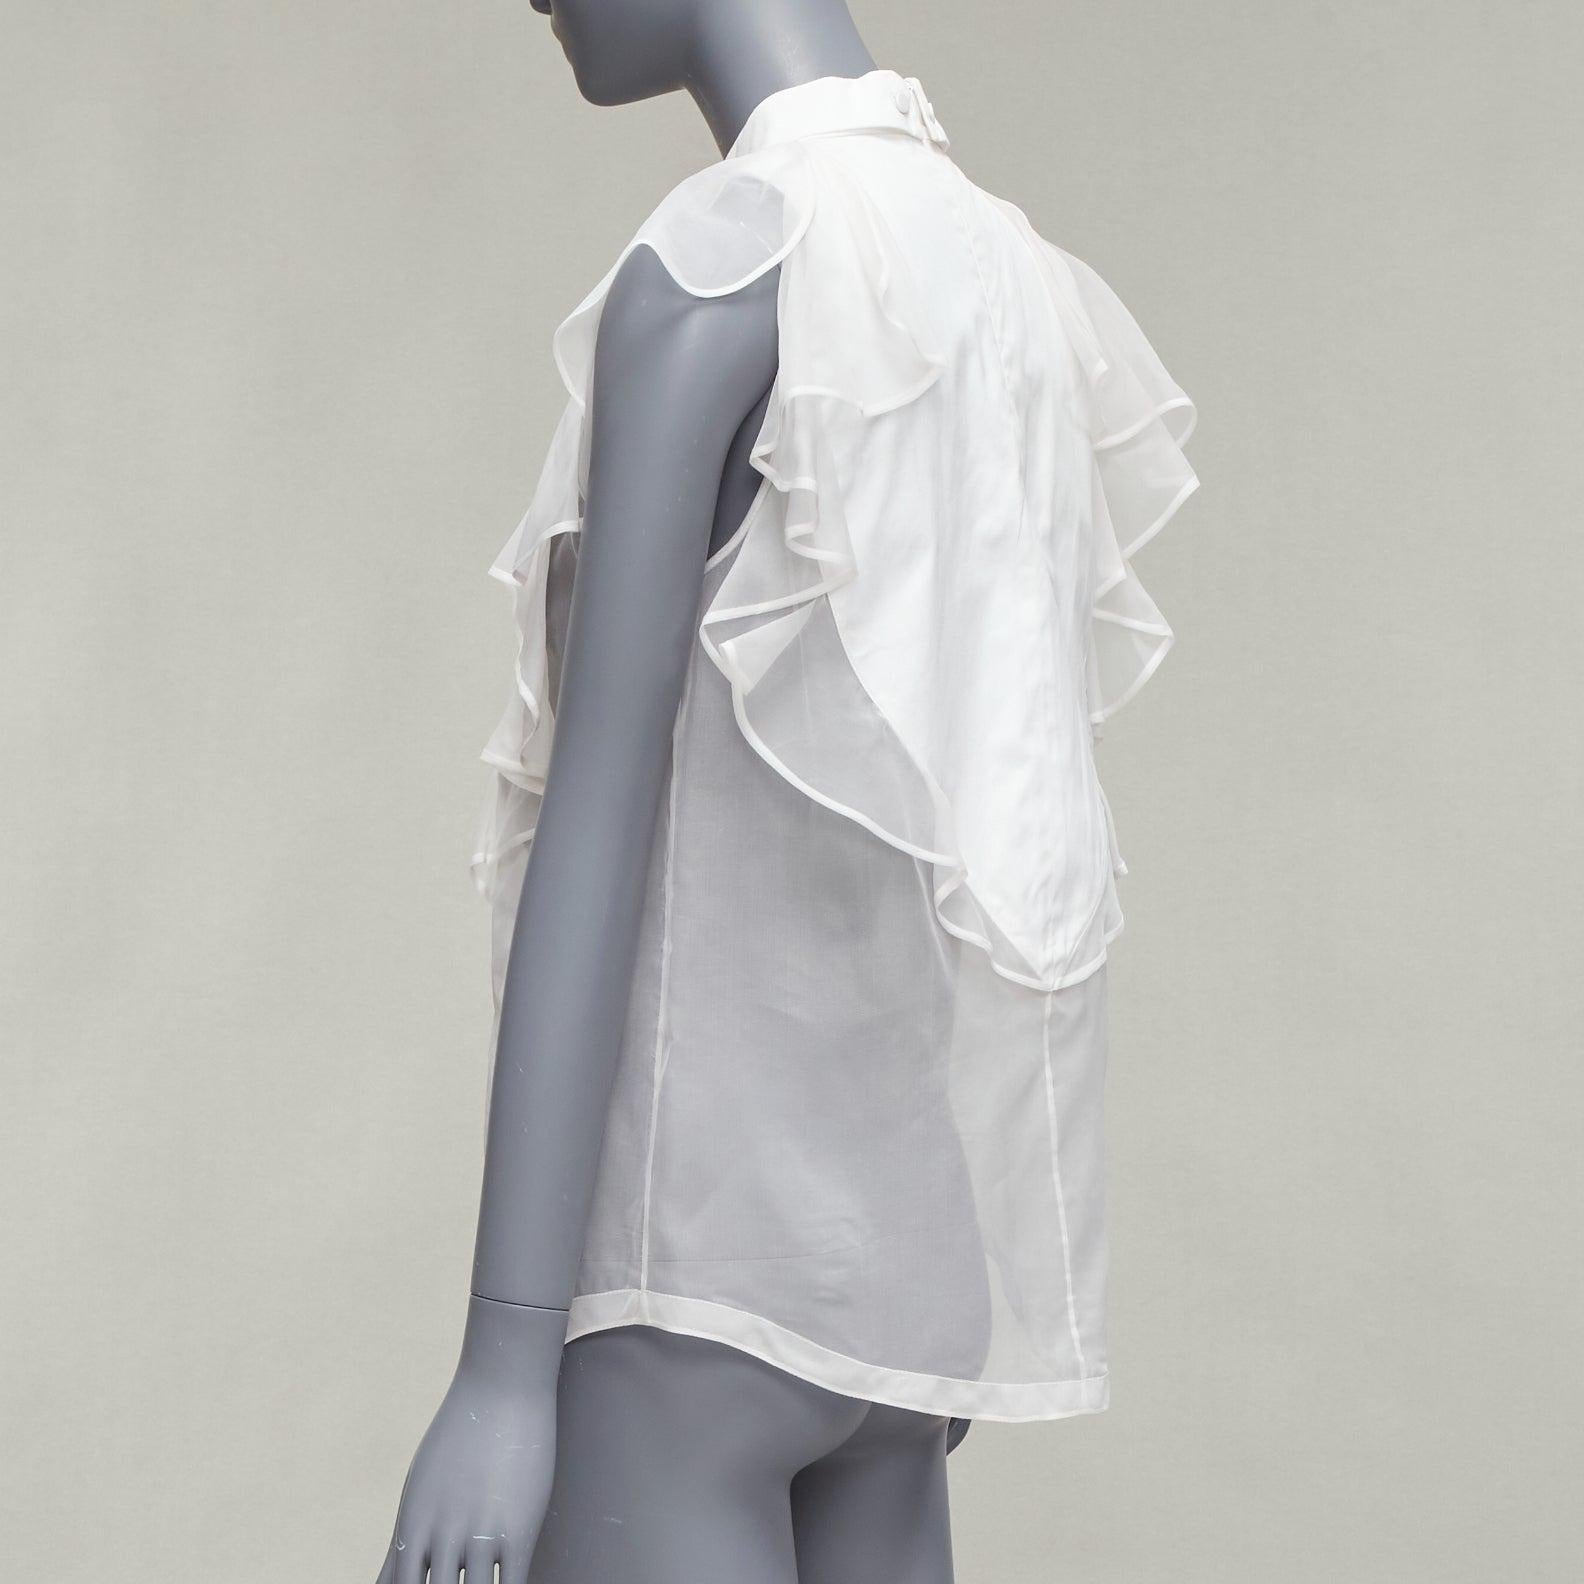 GIVENCHY white silky sheer ruffles front hi neck collar sleeveless shirt For Sale 2